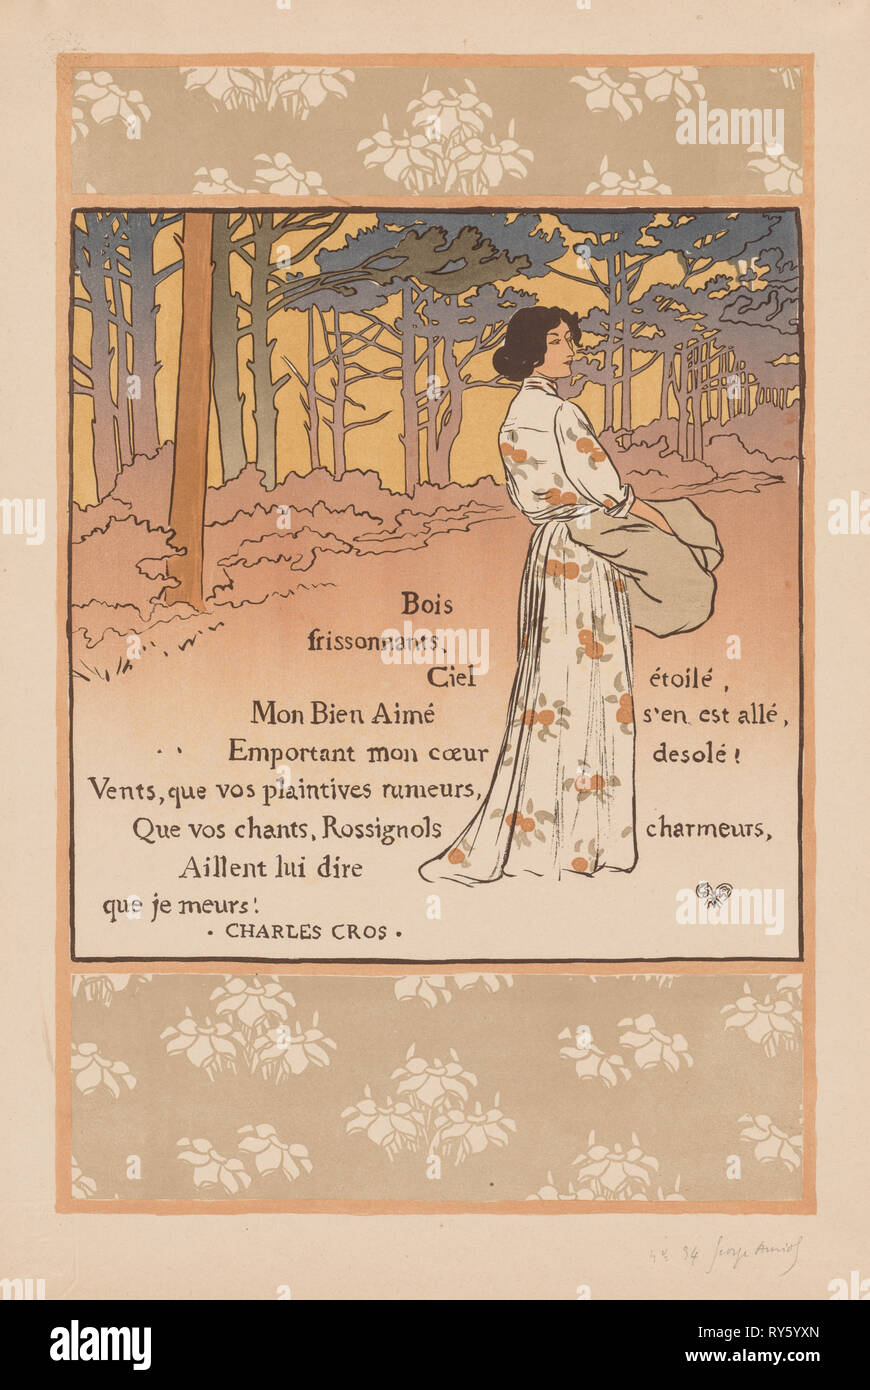 Trembling Woods, 1893. Georges Auriol (French, 1863-1938), L'Estampe originale, Album II. Lithograph, printed in color; sheet: 58.4 x 32.5 cm (23 x 12 13/16 in.); image: 49.7 x 32.5 cm (19 9/16 x 12 13/16 in Stock Photo